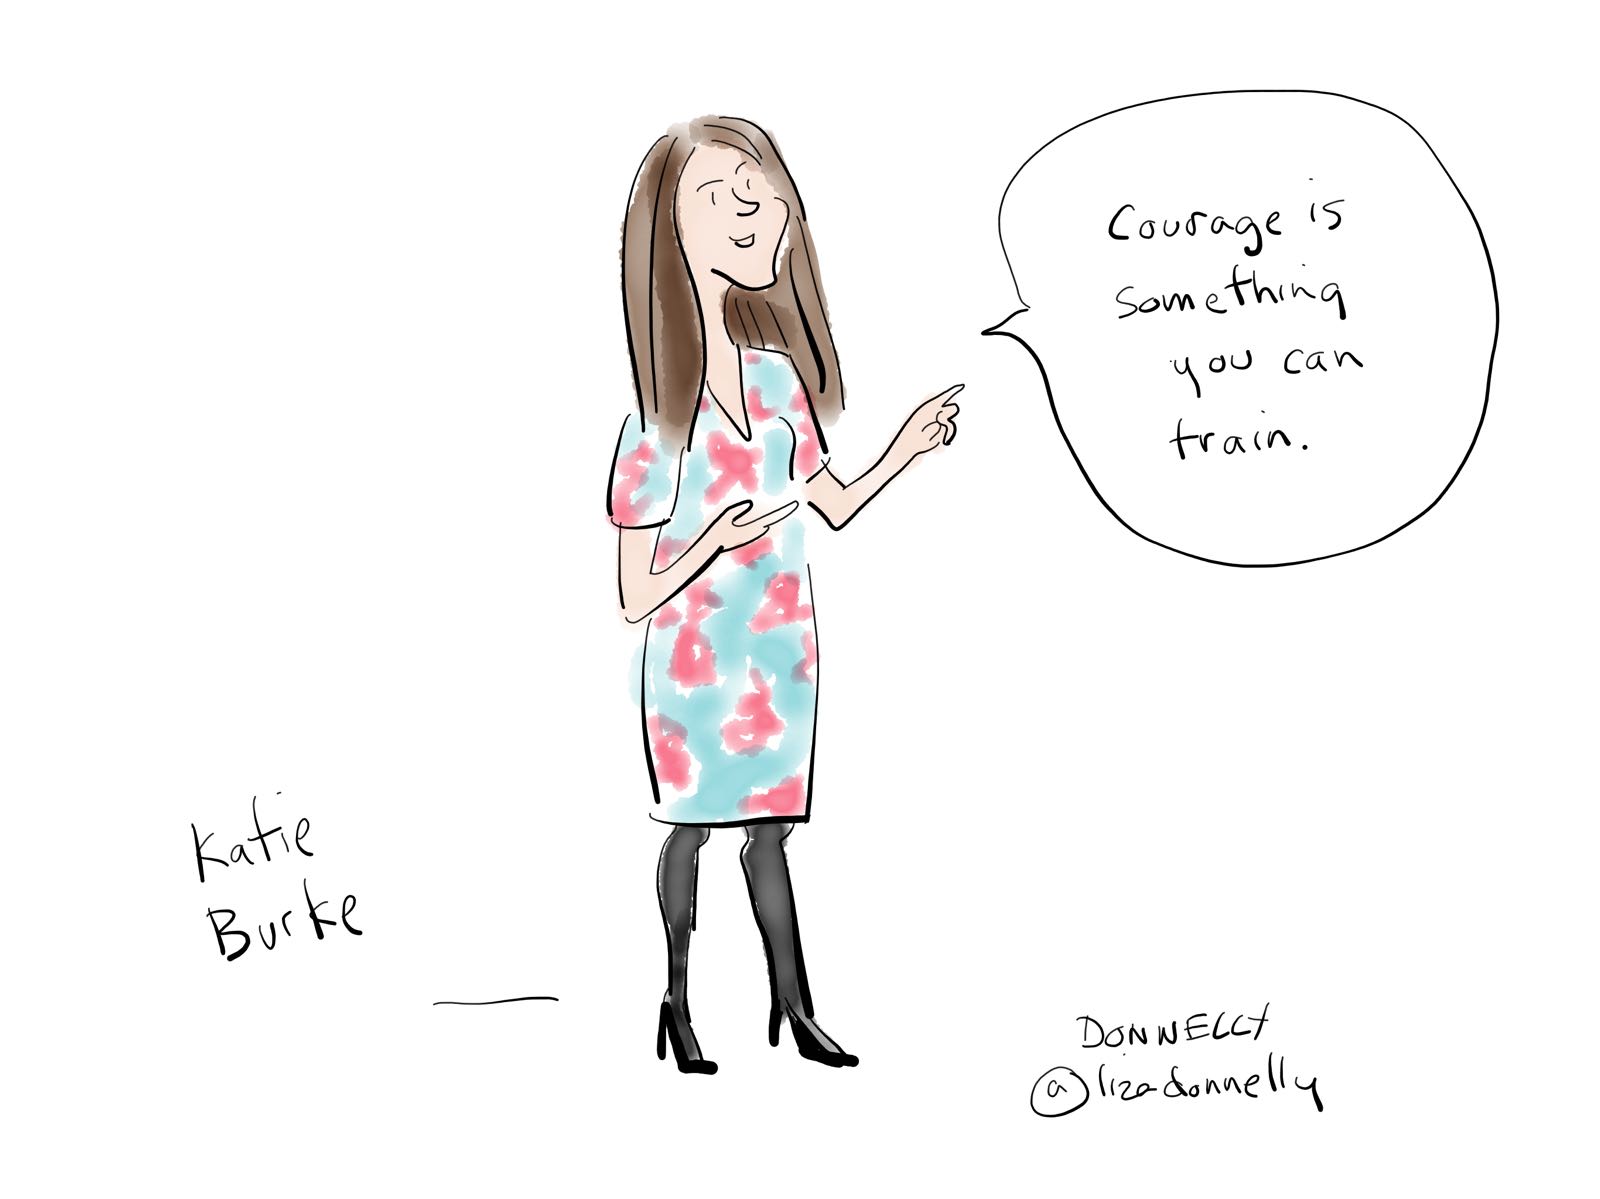 An illustration of Katie Burke by Liza Donnelly. Her speech bubble says "Courage is something you can train."